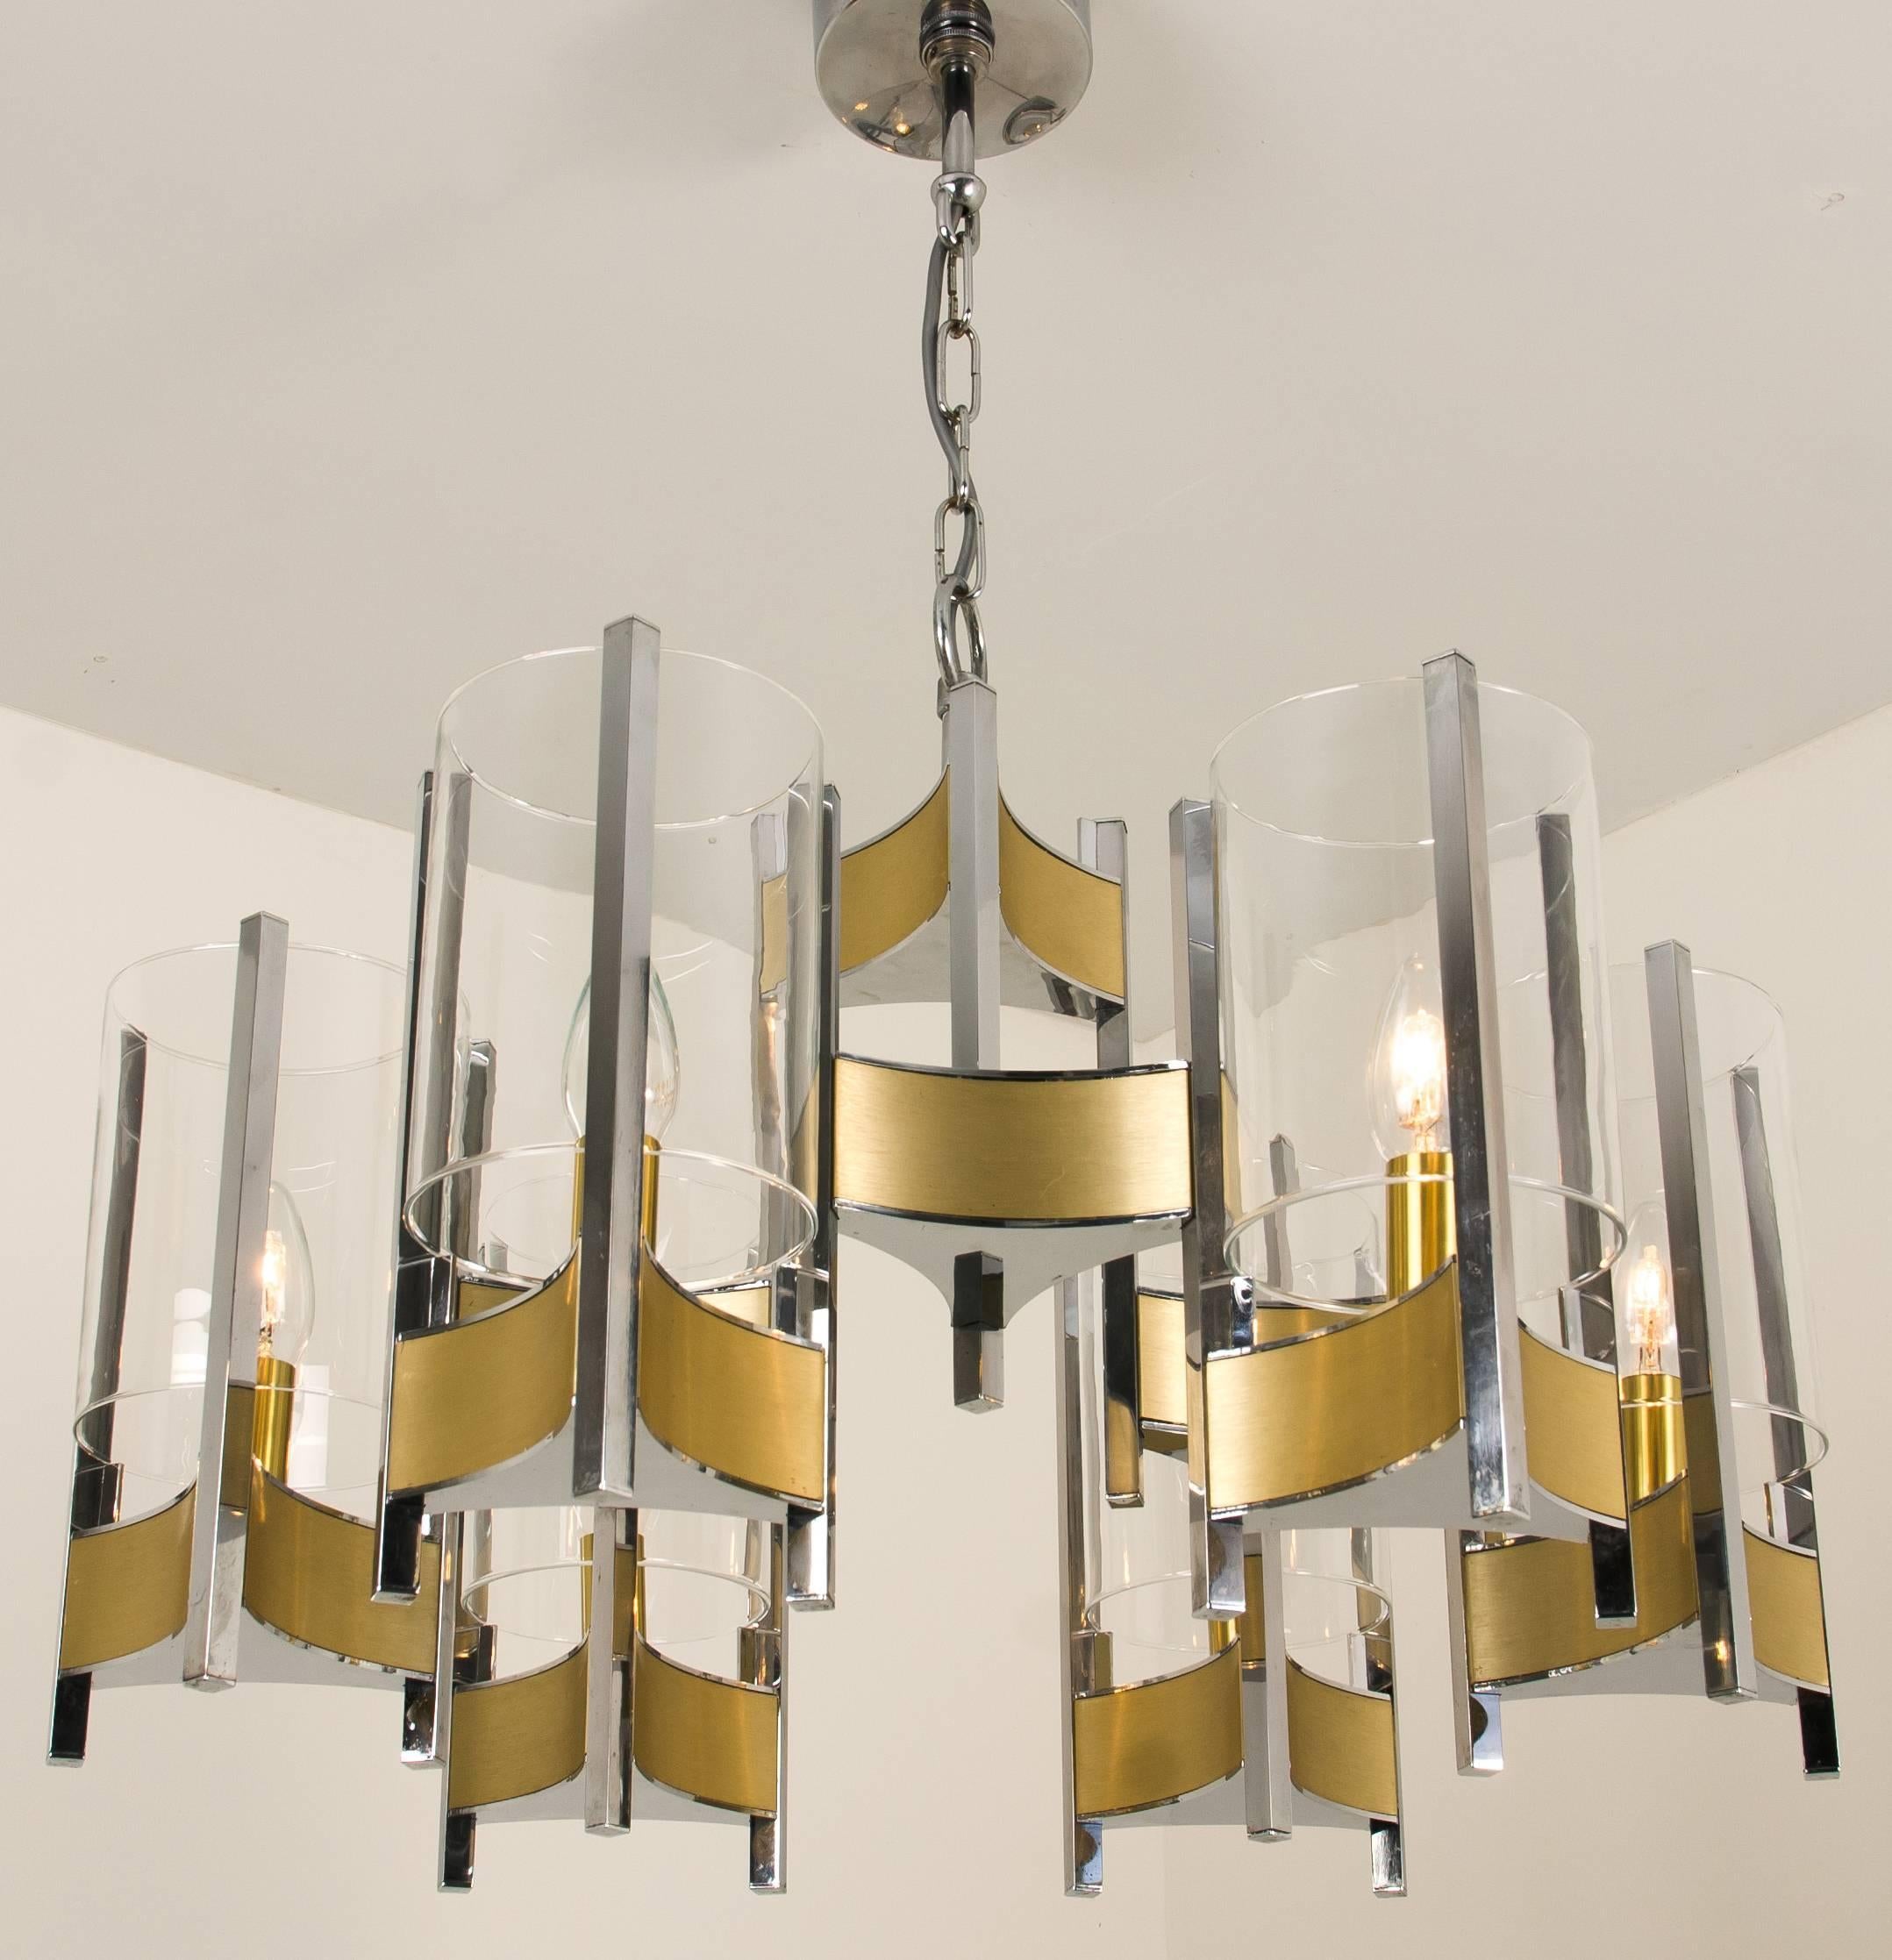 Gaetano Sciolari chrome and brushed brass two-tier nine-light chandelier with cylindrical glass shades, stylish monumental Sciolari chandelier. Consist of three arms with glass cylinders. Chrome and brushed brass base.

Cleaned and well-wired, in